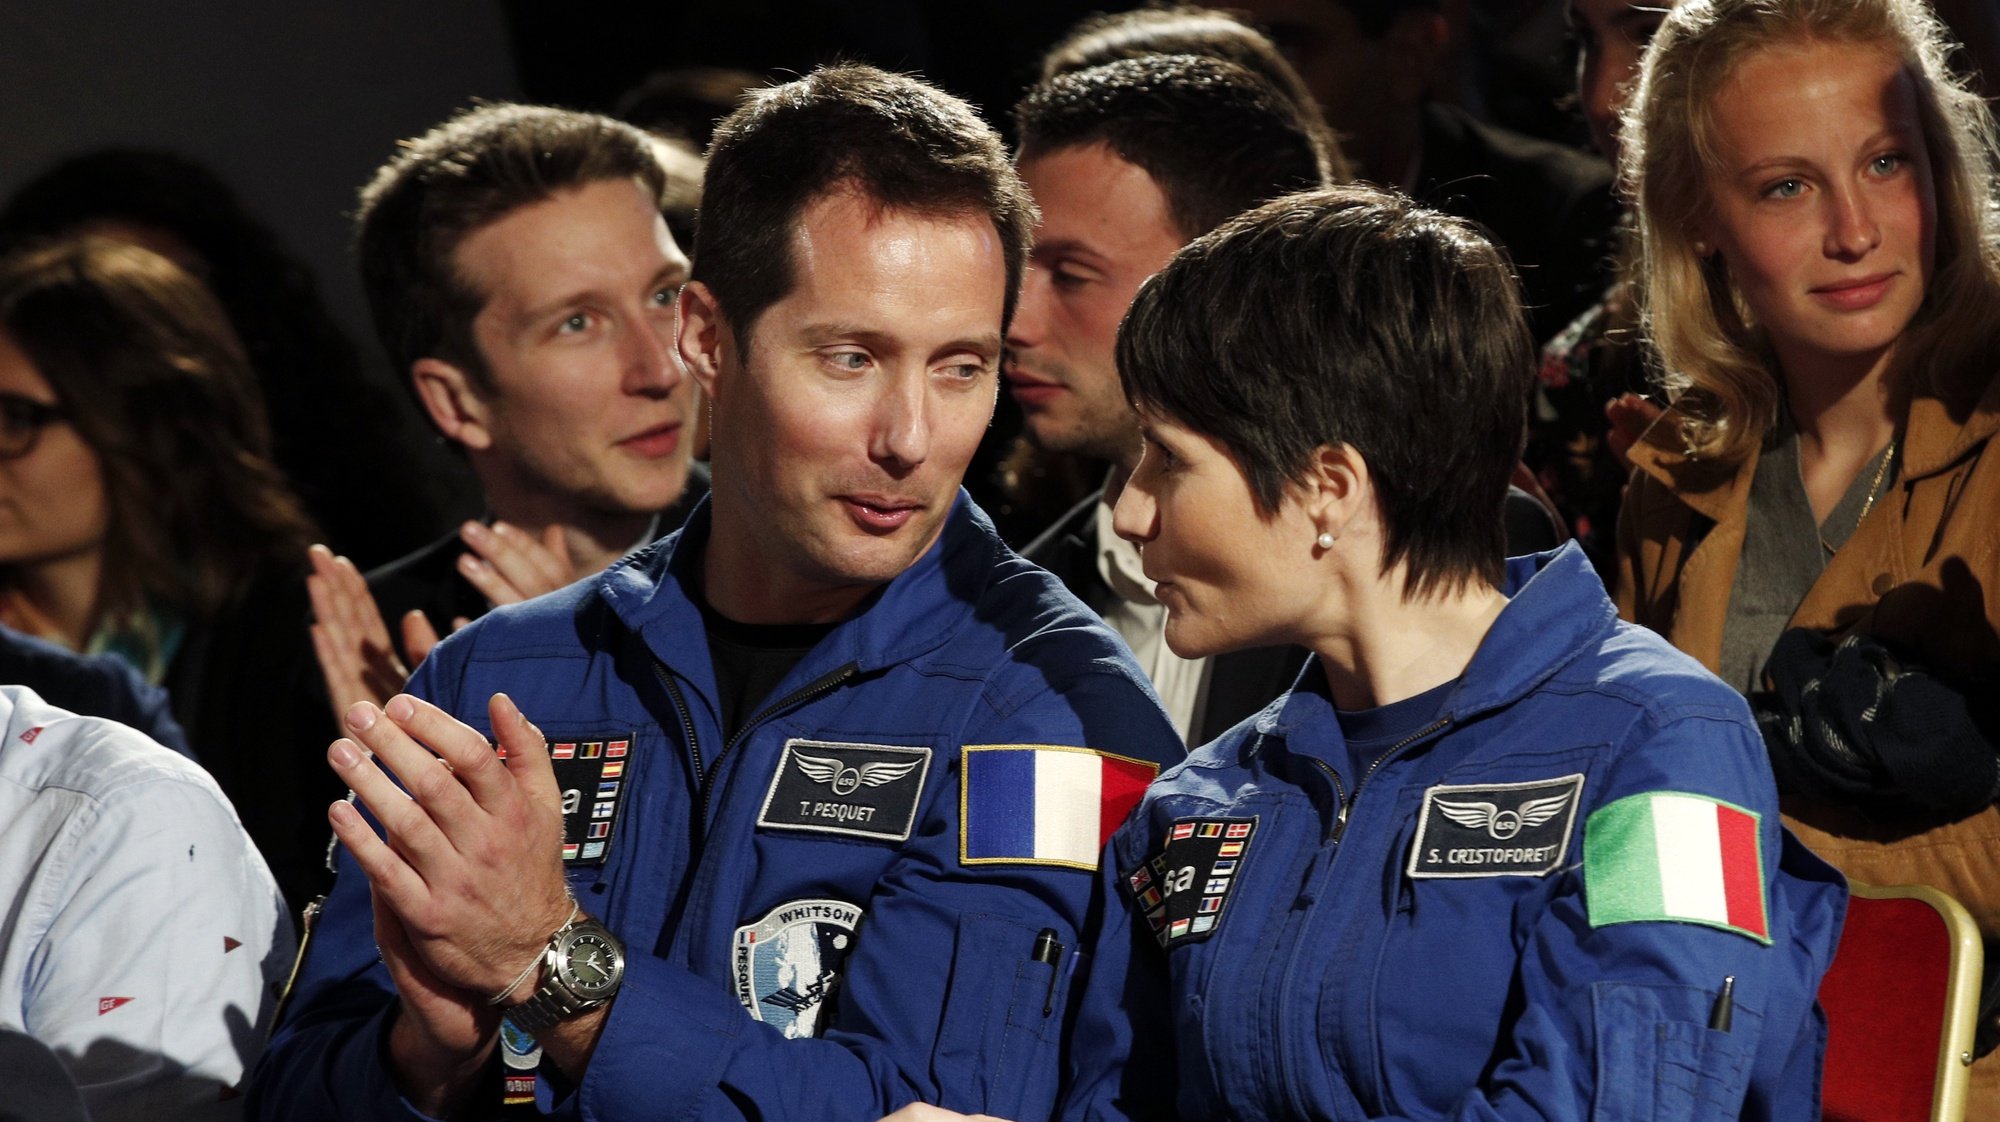 epa07542791 French astronaut Thomas Pesquet (L) and Italian astronaut Samantha Cristoforetti (R) attend an event to commemorate the 500th anniversary of the death of Italian Renaissance painter and scientist Leonardo da Vinci at the Chambord Castle, in Chambord, France, 02 May 2019.  EPA/YOAN VALAT / POOL MAXPPP OUT